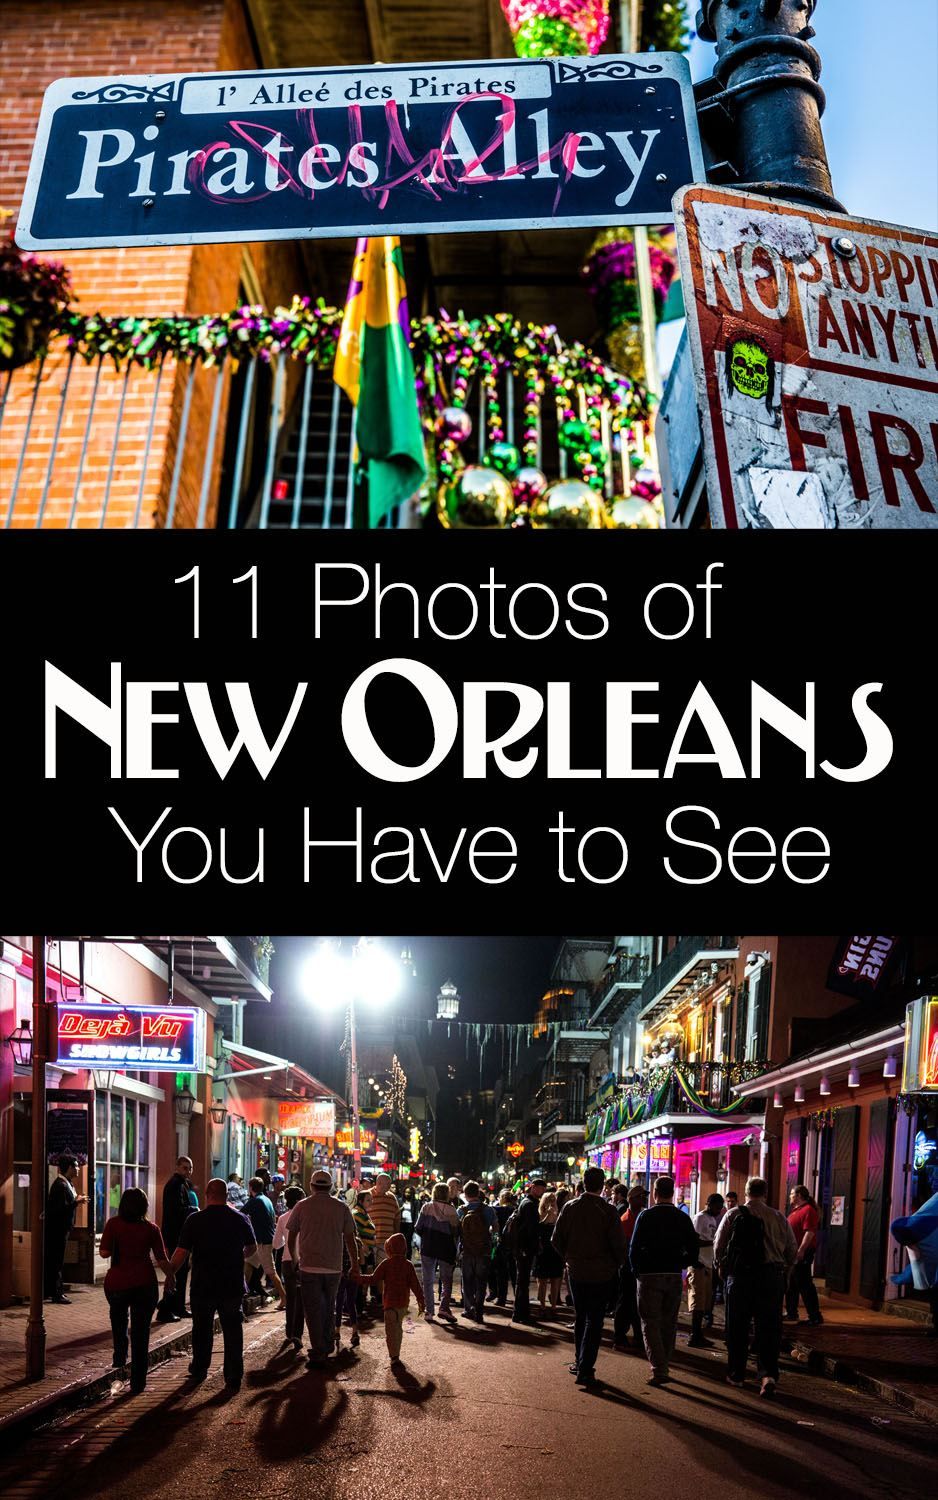 11 Photos of New Orleans